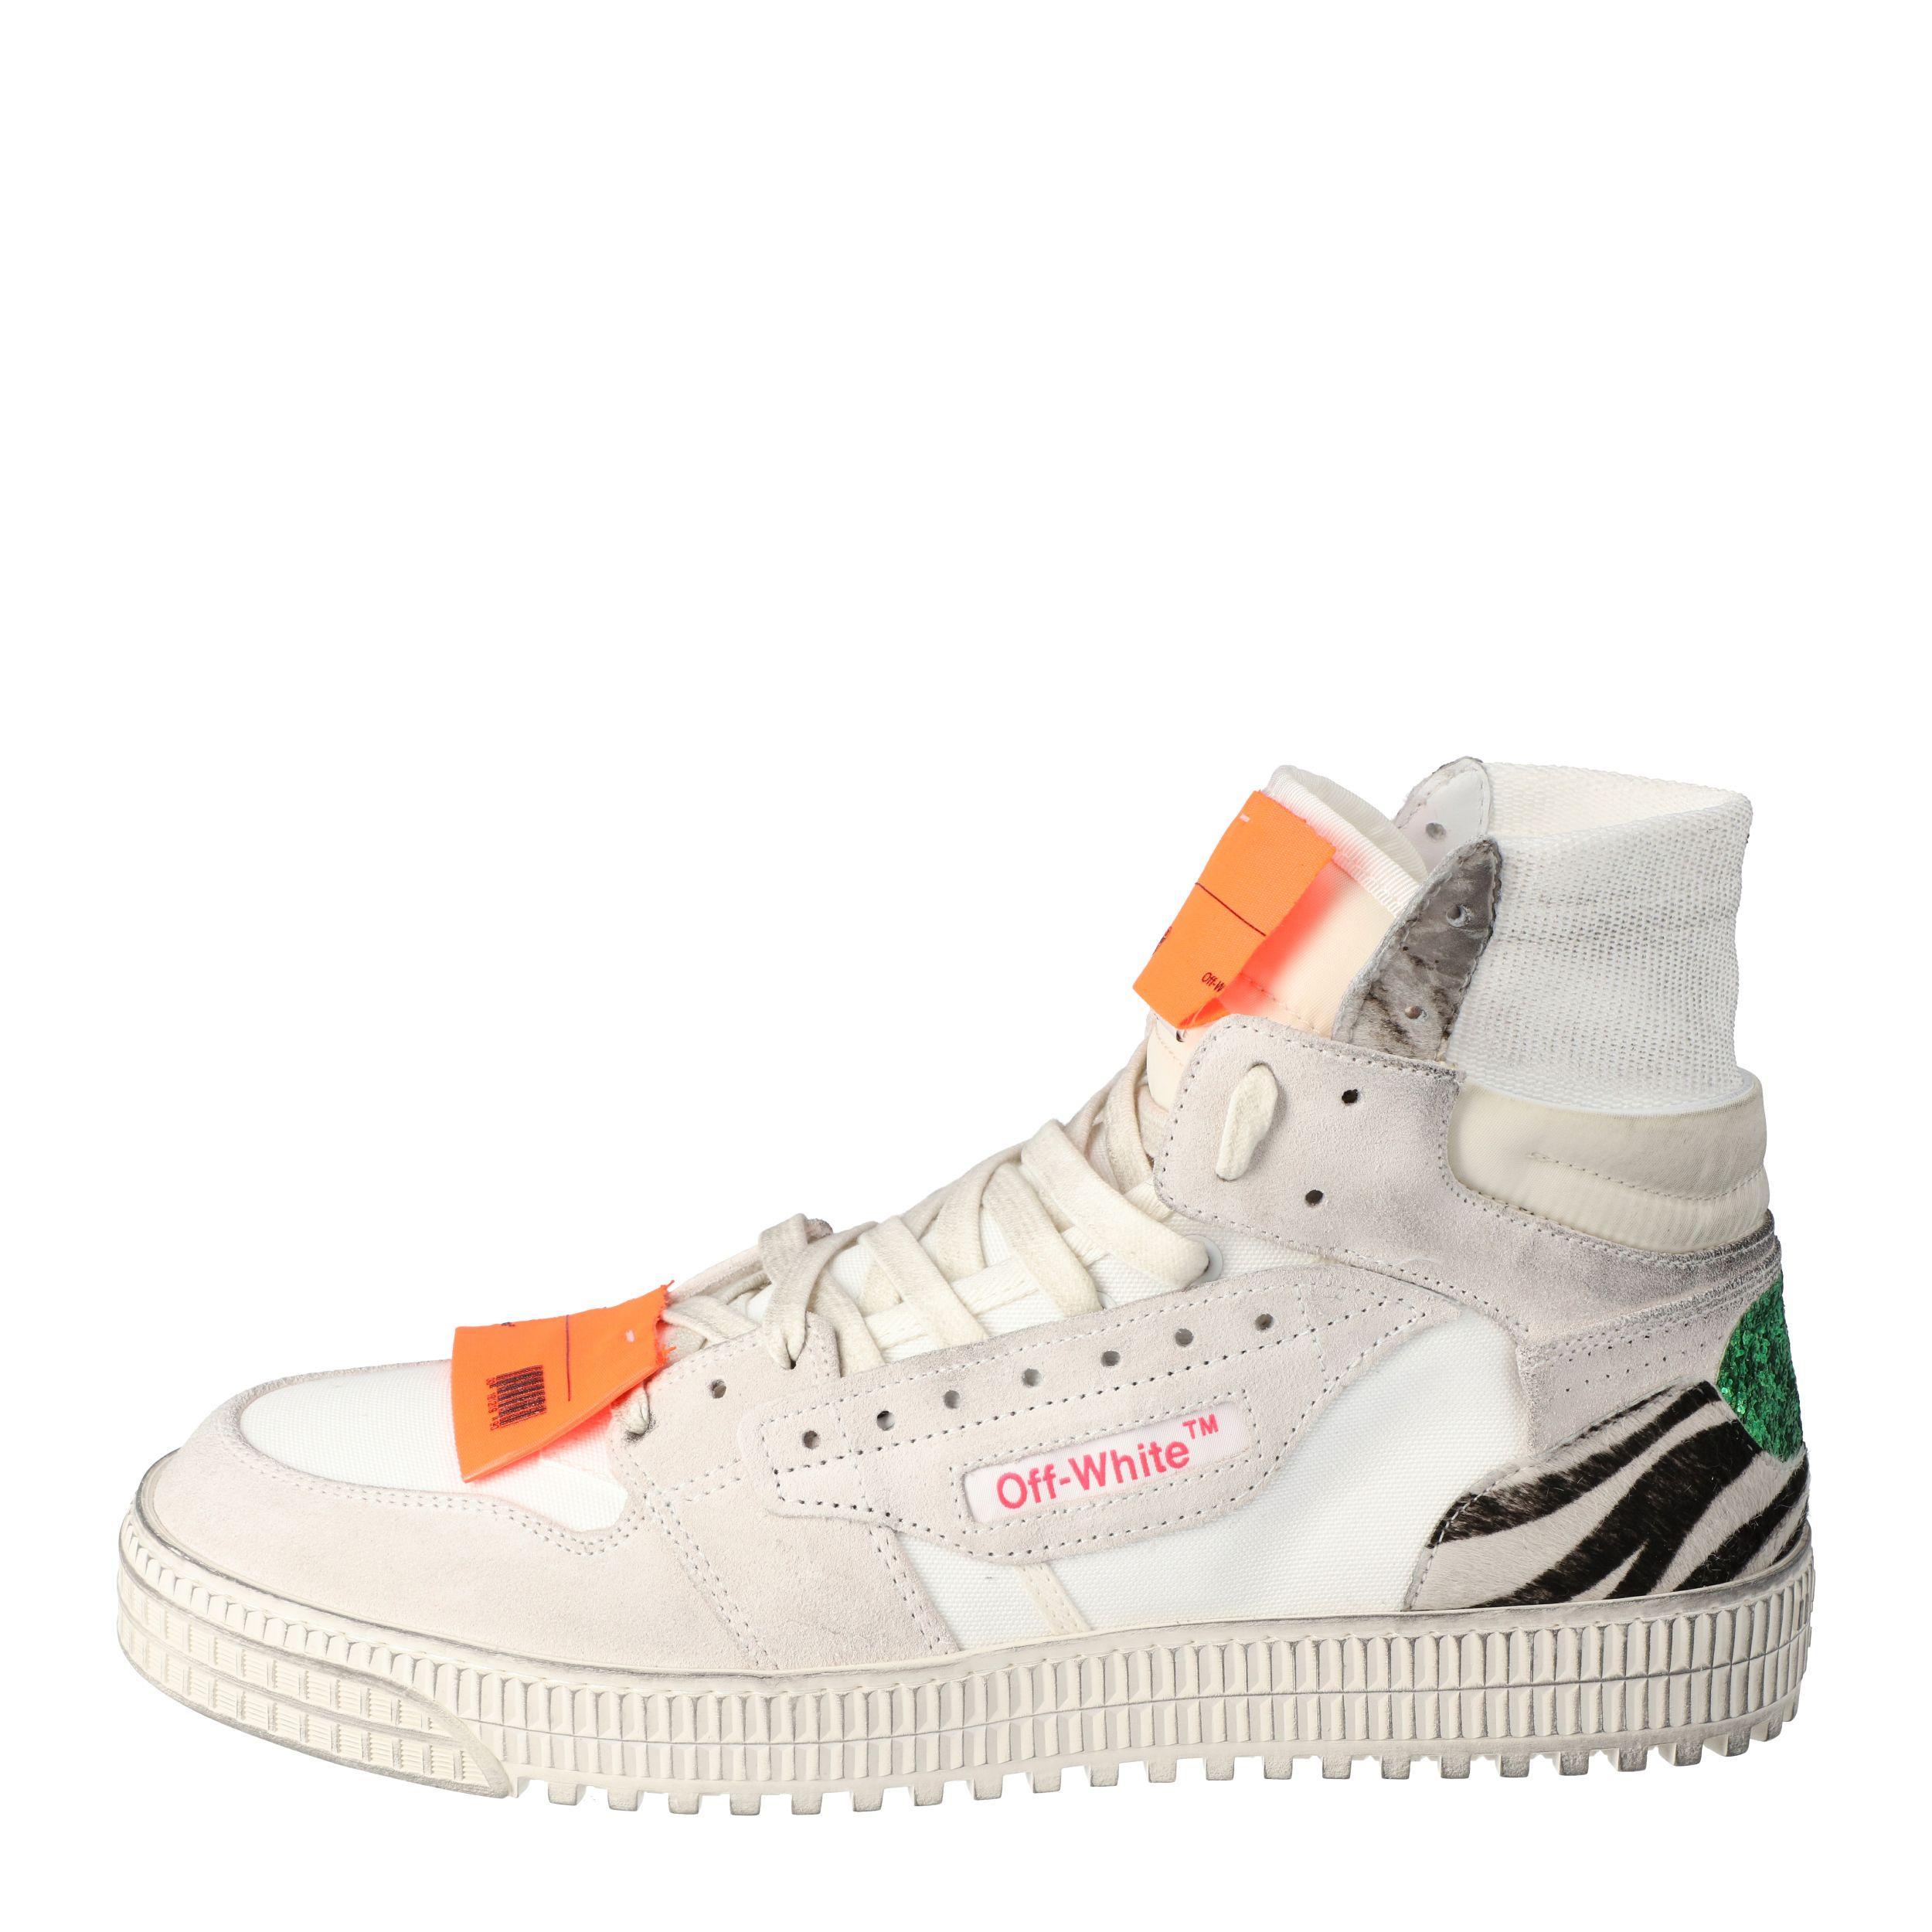 Add a hint of sparkle to your casual look with this pair of sneakers from the design house of Off White. Masterfully crafted from premium quality material these shoes come in lace-up design and a high-top silhouette with printed detail that makes a